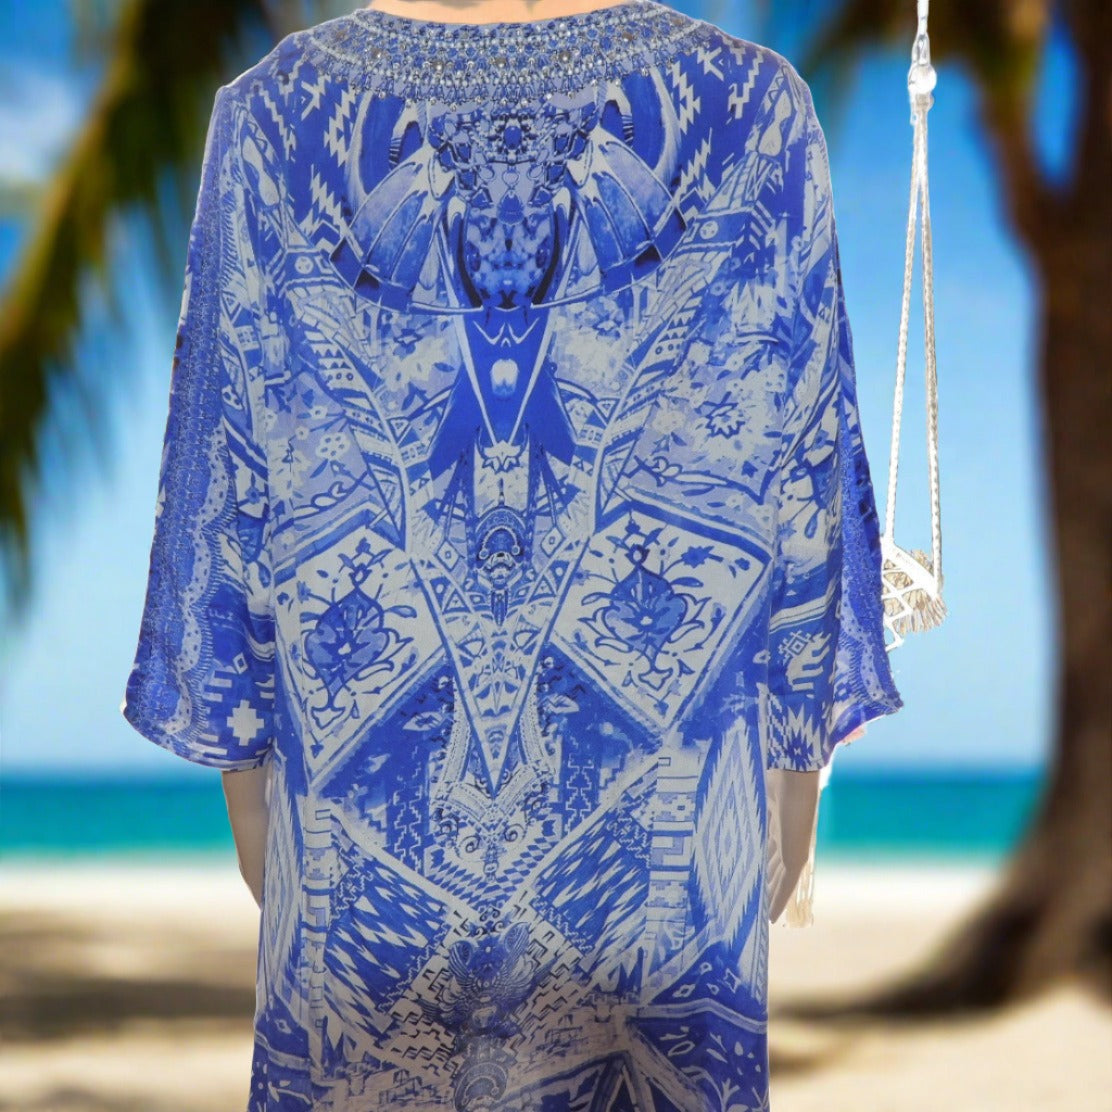 Venice 3/4 sleeve Silk Embellished Tunic Dress at Kaftans that Bling